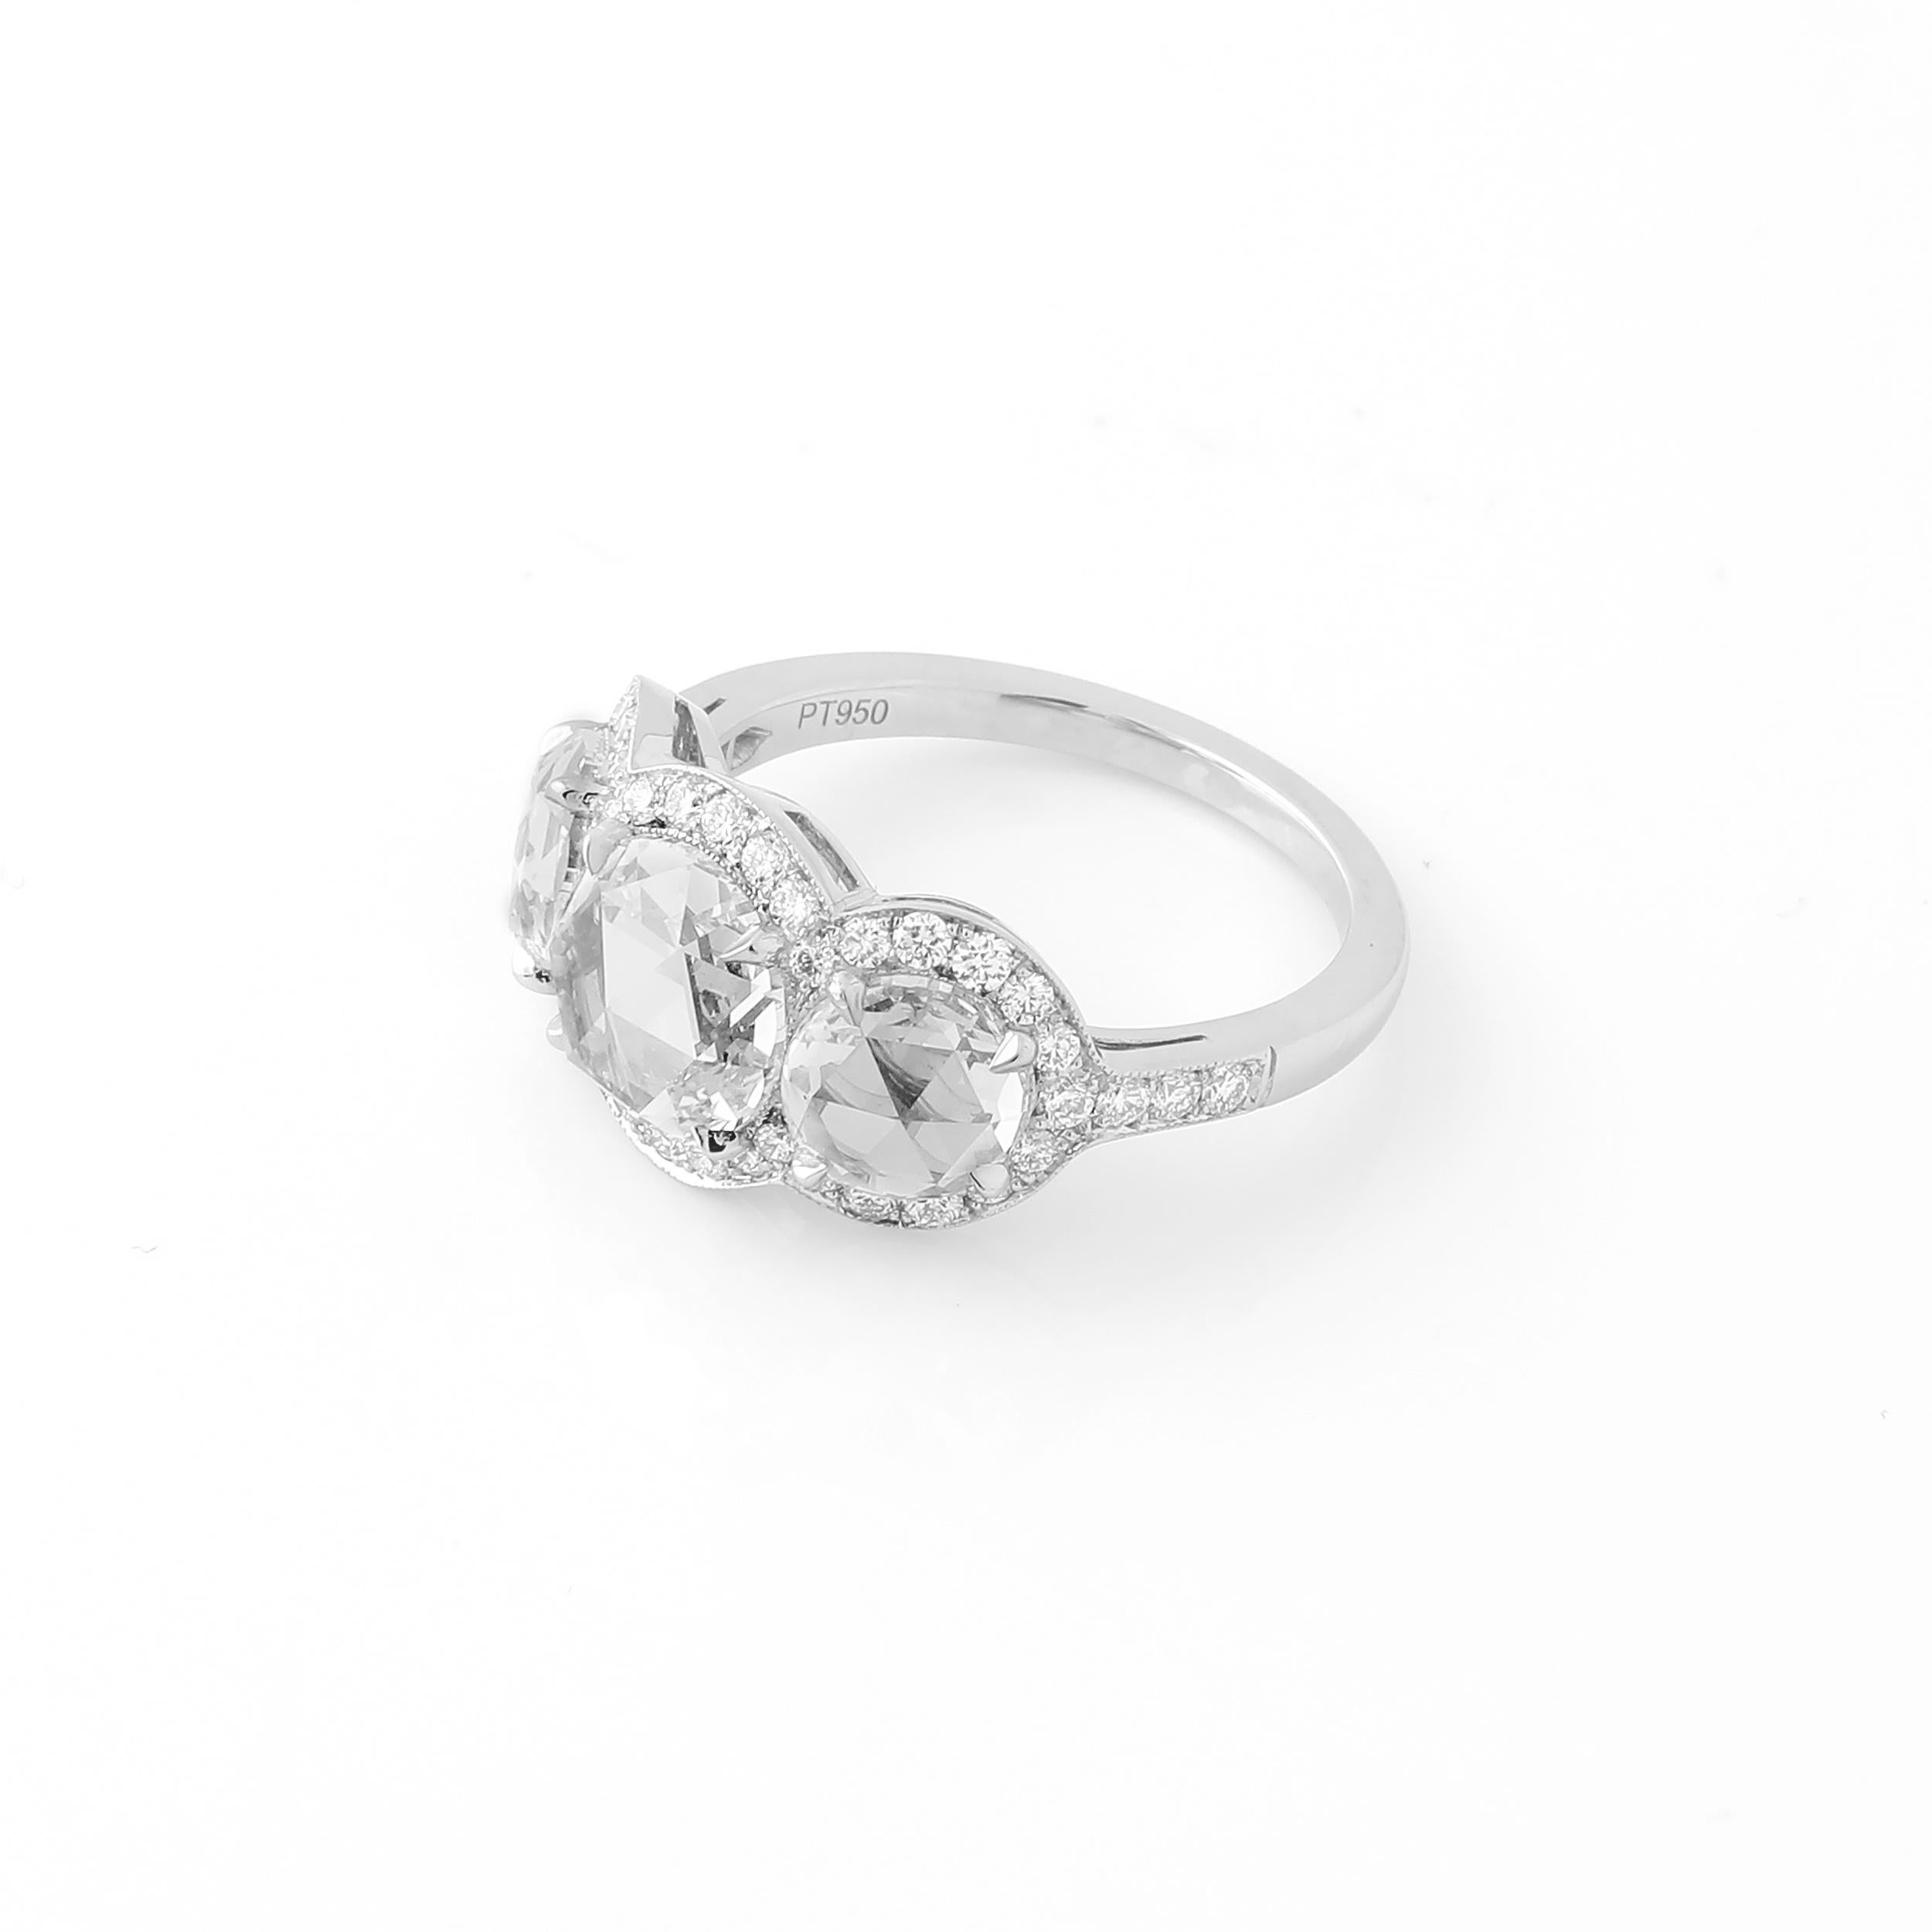 This ring features a 1.51 carat rose cut round diamond at its center, and a pair of beautifully matched rose cut rounds weighing 1.40 carats as side stones. The diamonds are not certified, but are 100% natural and approximately G-H color and VVS